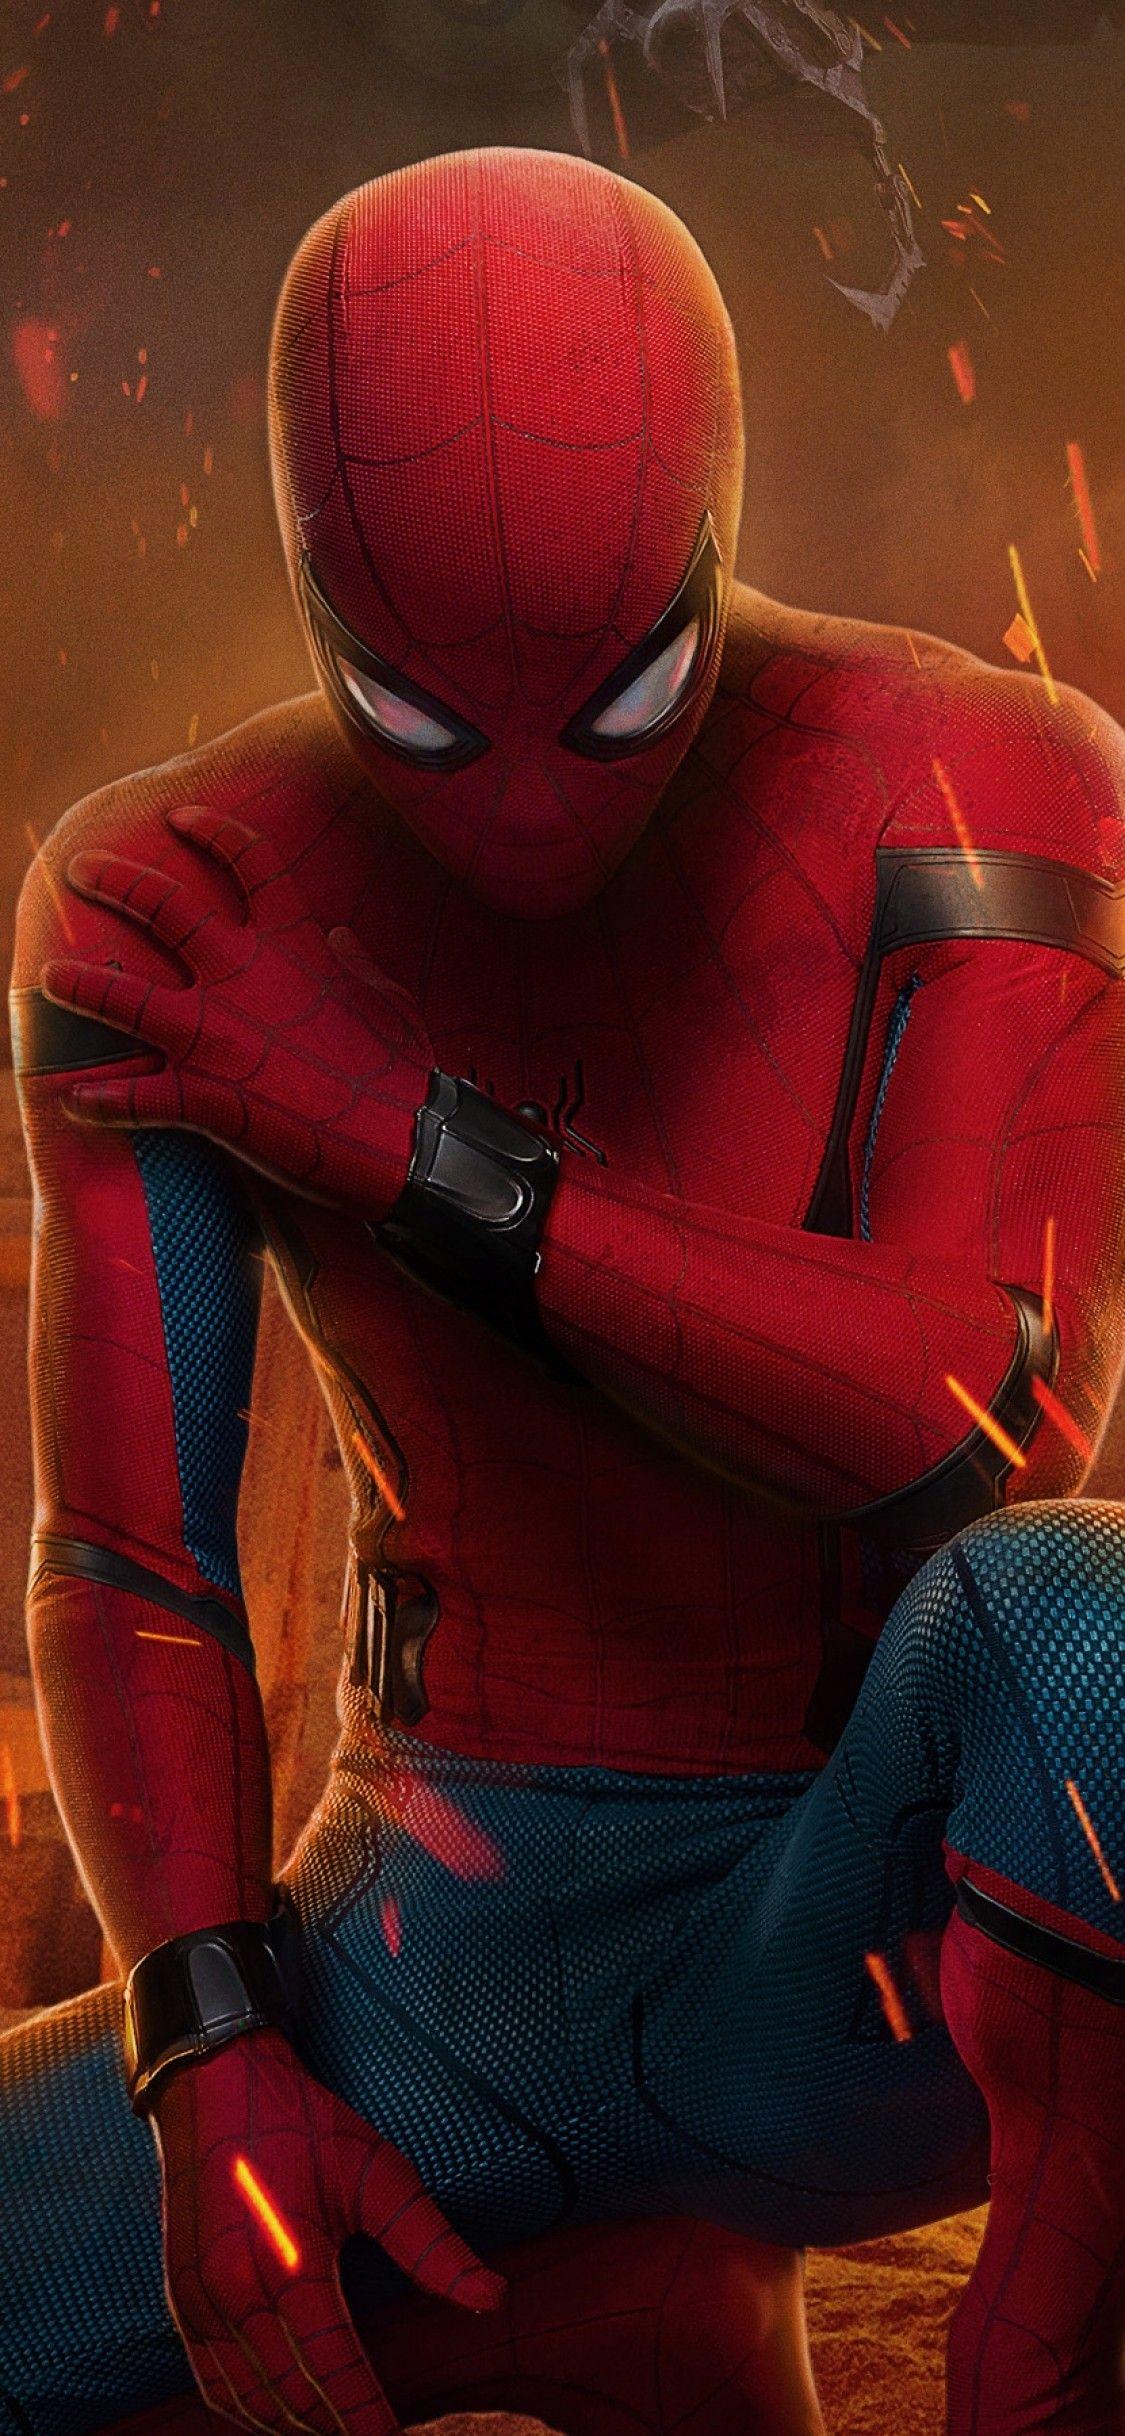 Spider-Man: Homecoming for mac download free